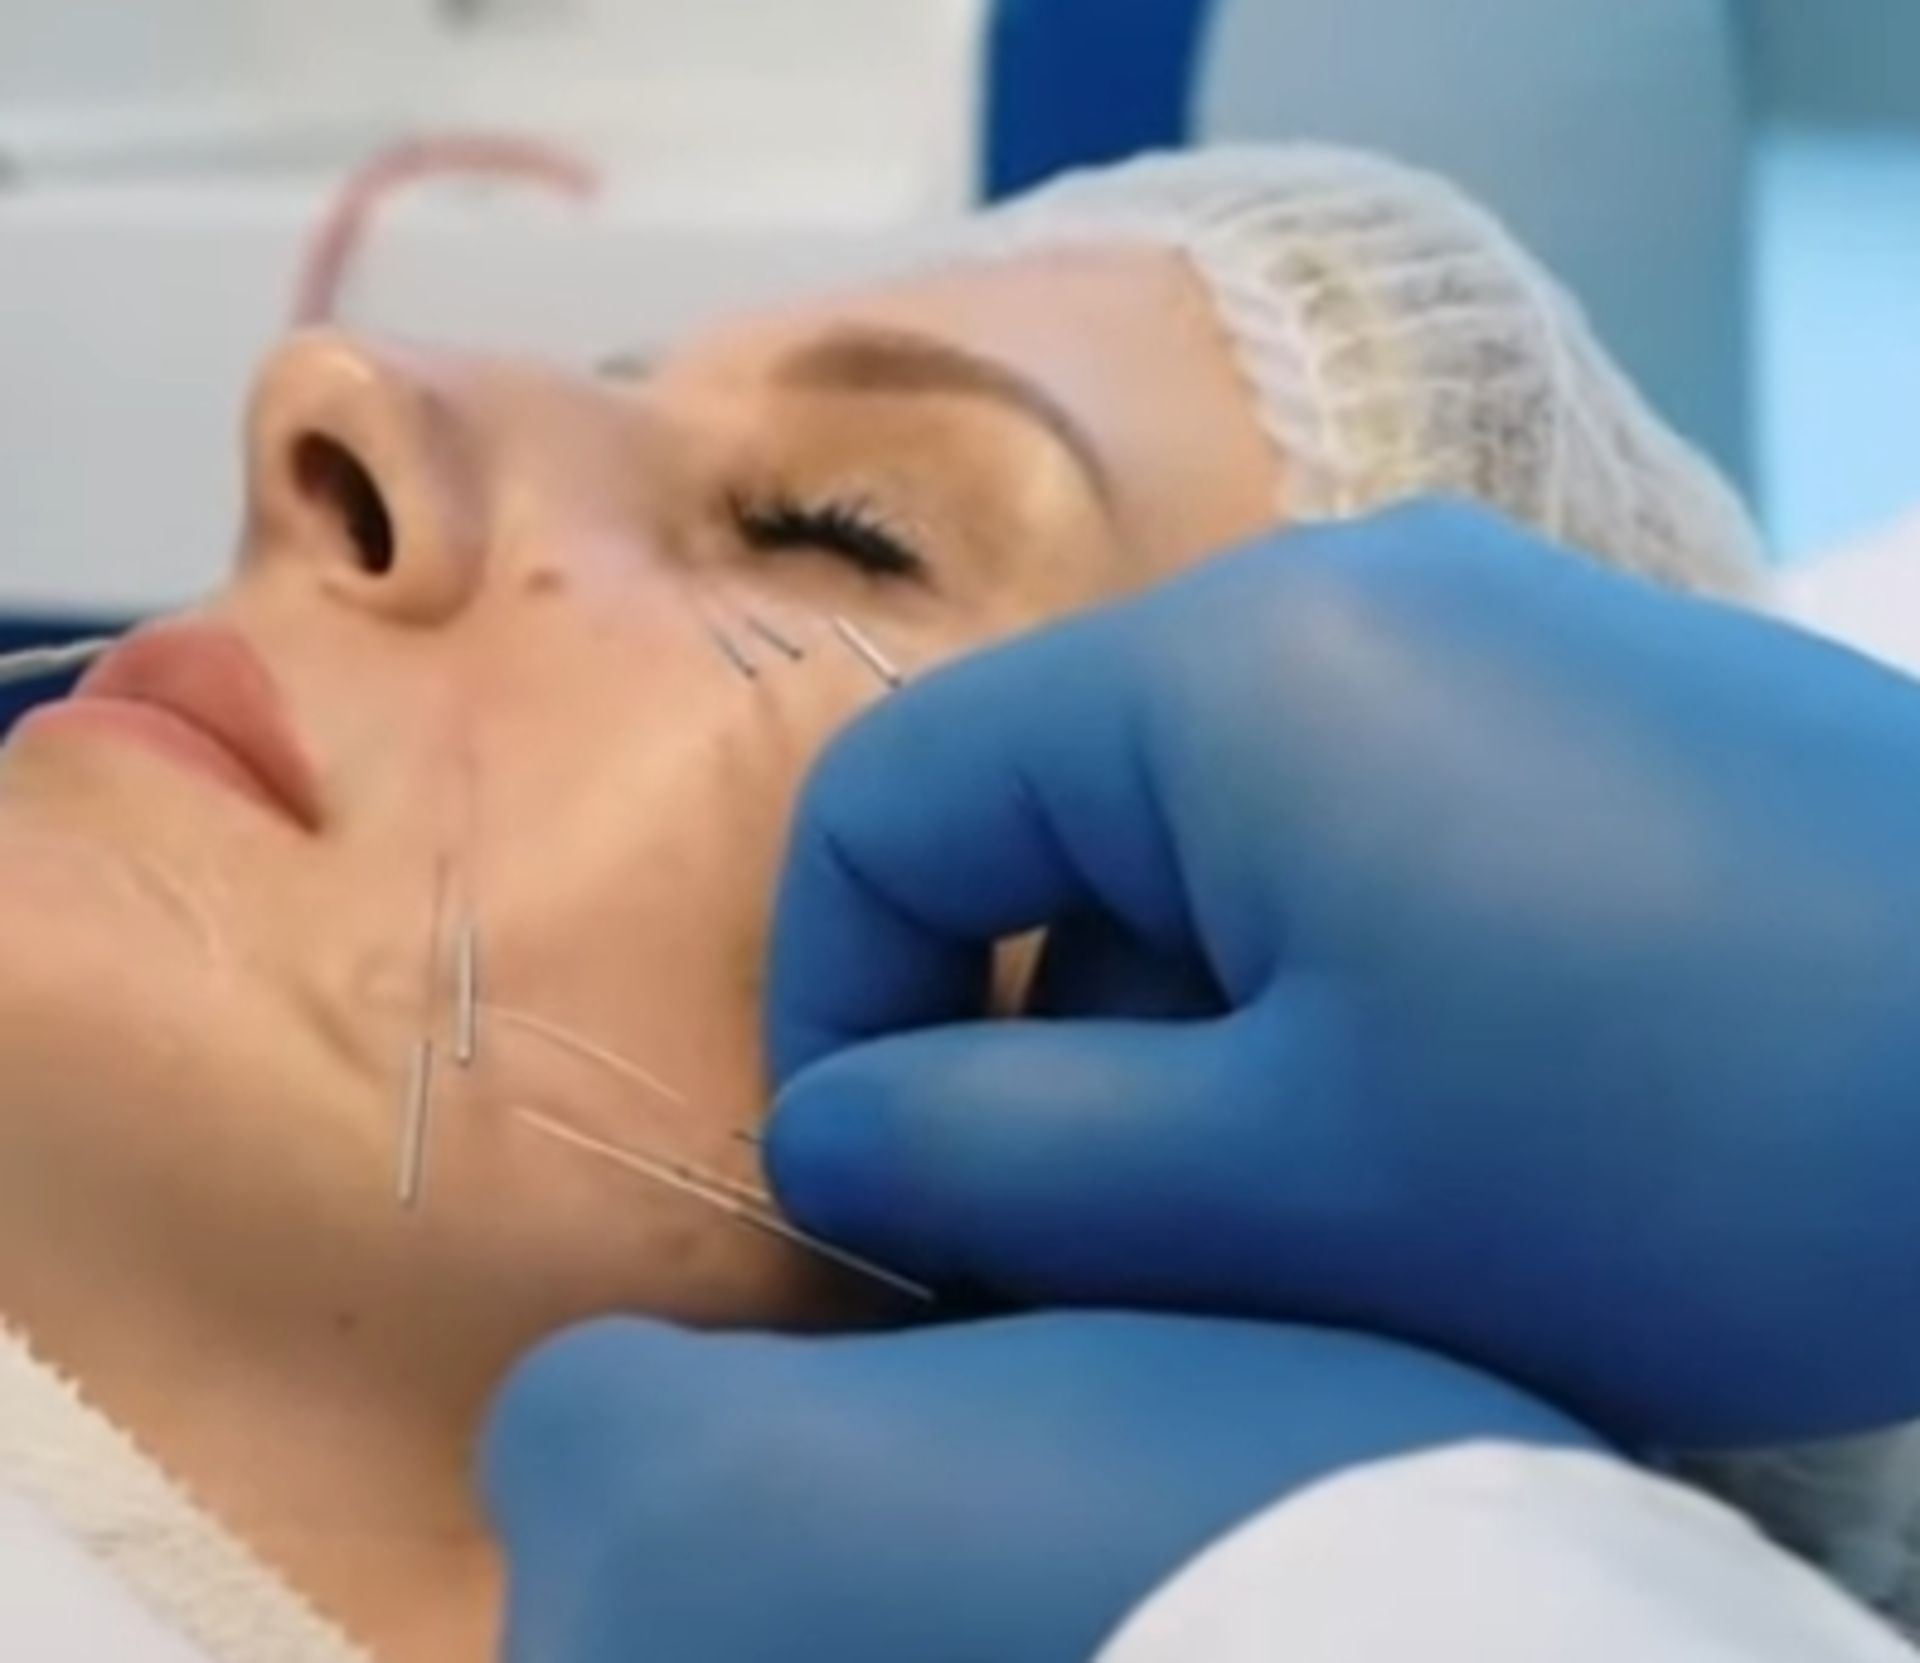 1 x GMV Needle Shaping System For None Surgical Facial and Body Reconstruction - Image 4 of 9